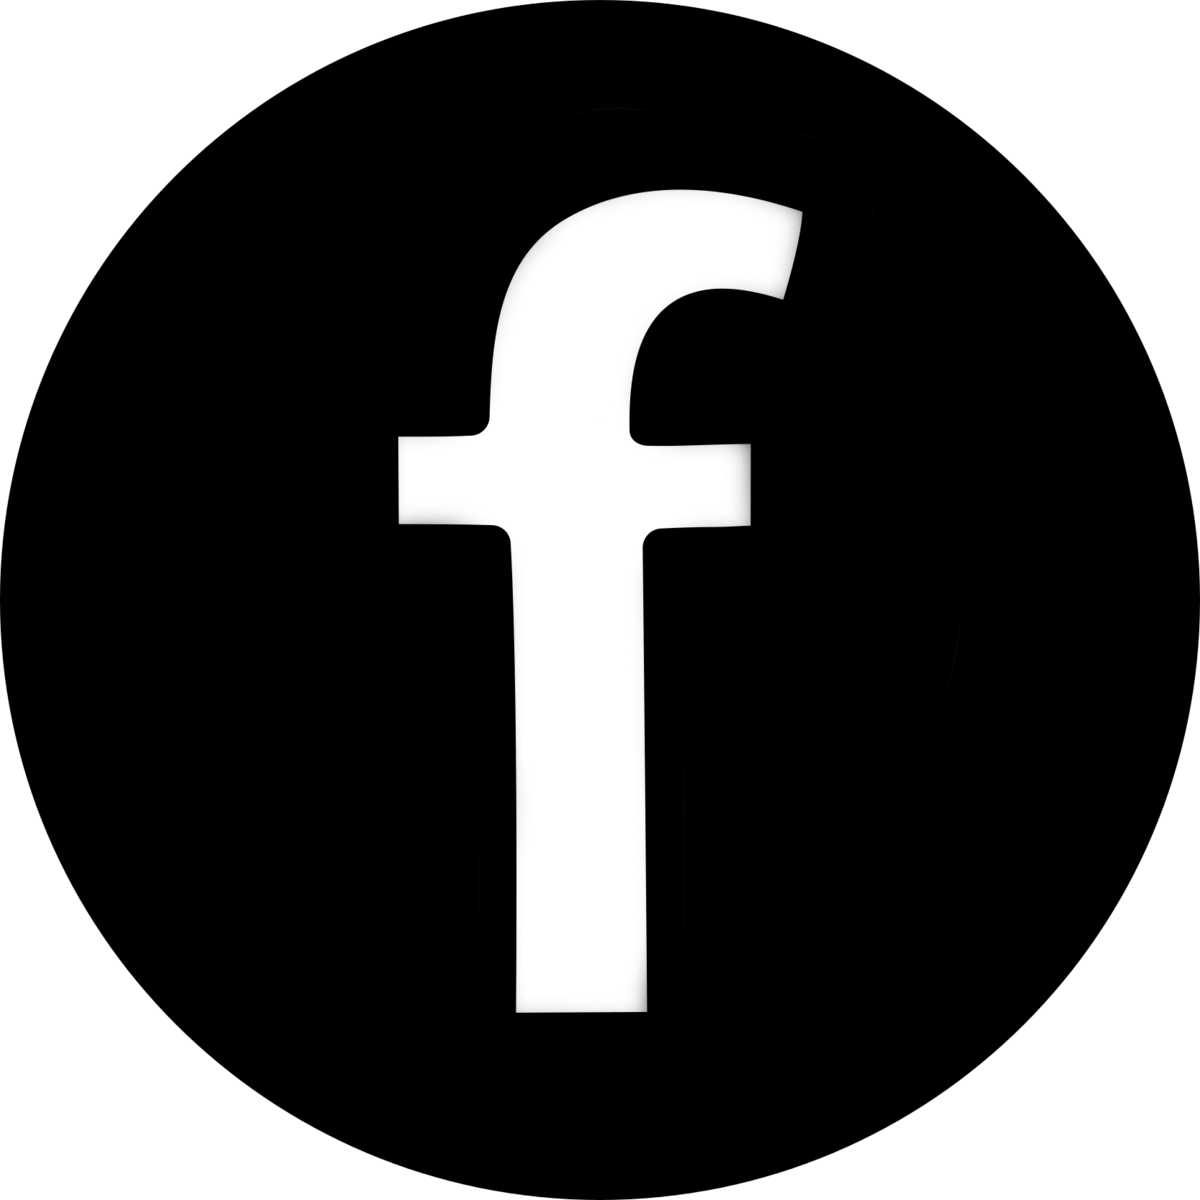 Facebook Icon Png 8.png. HD Wallpaper, HD Image, HD Picture